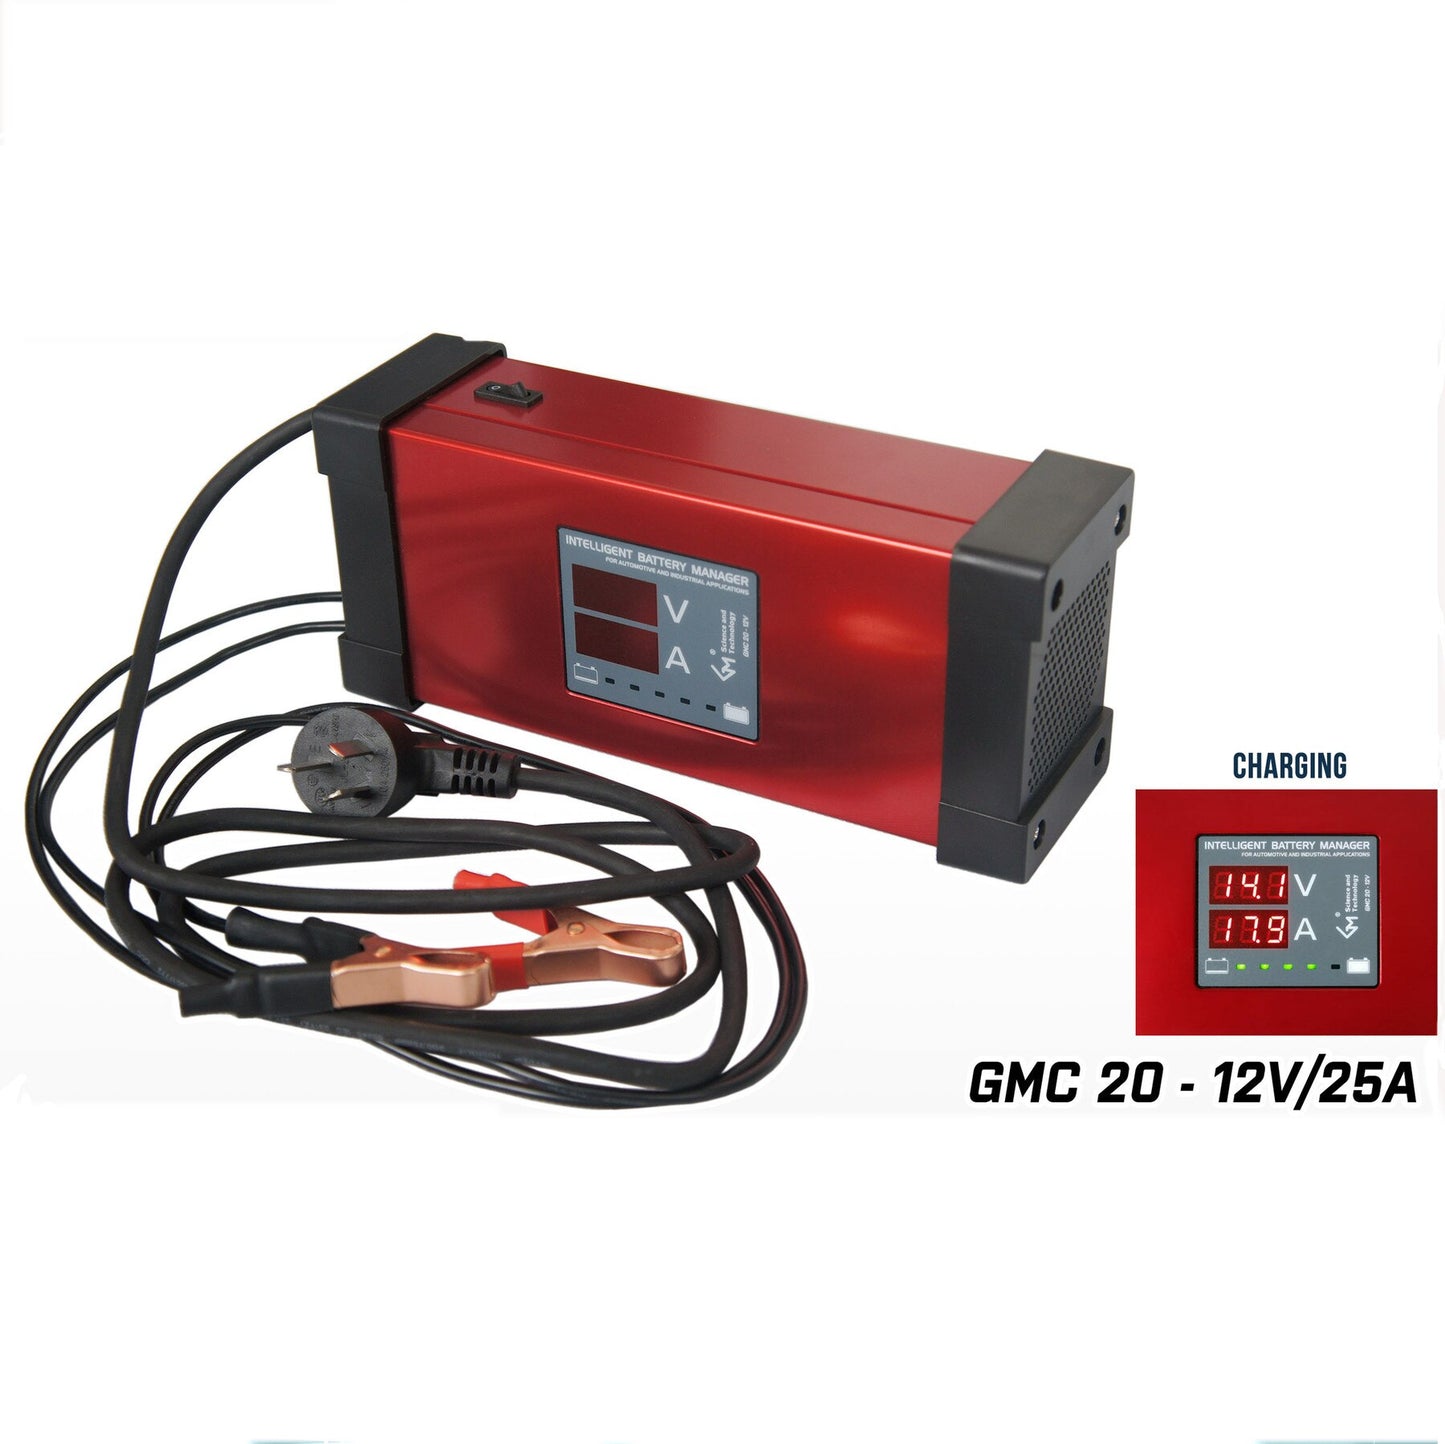 GMC 20 Multi-function Intelligent Charge Monitoring Power Supply